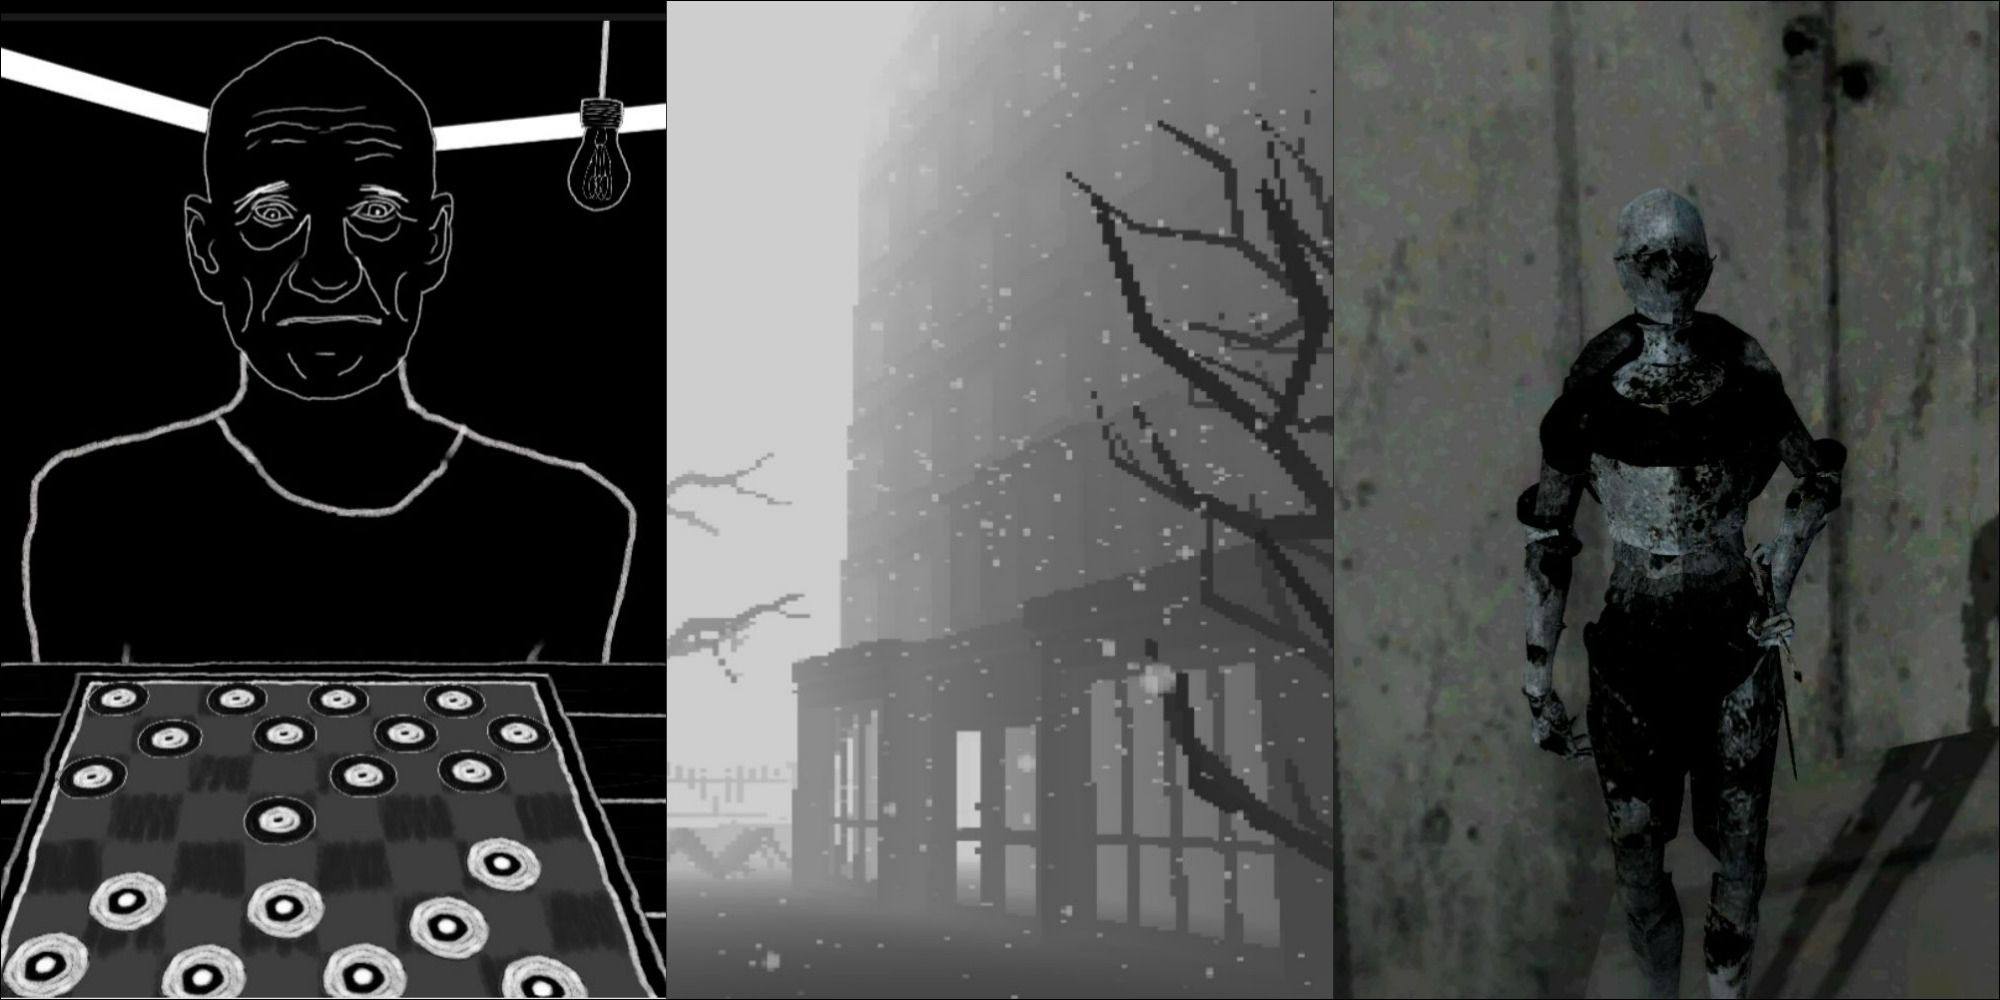 Atmospheric black and white shots from One Last Game, The Drowning Machine, and 0_abyssalSomewhere